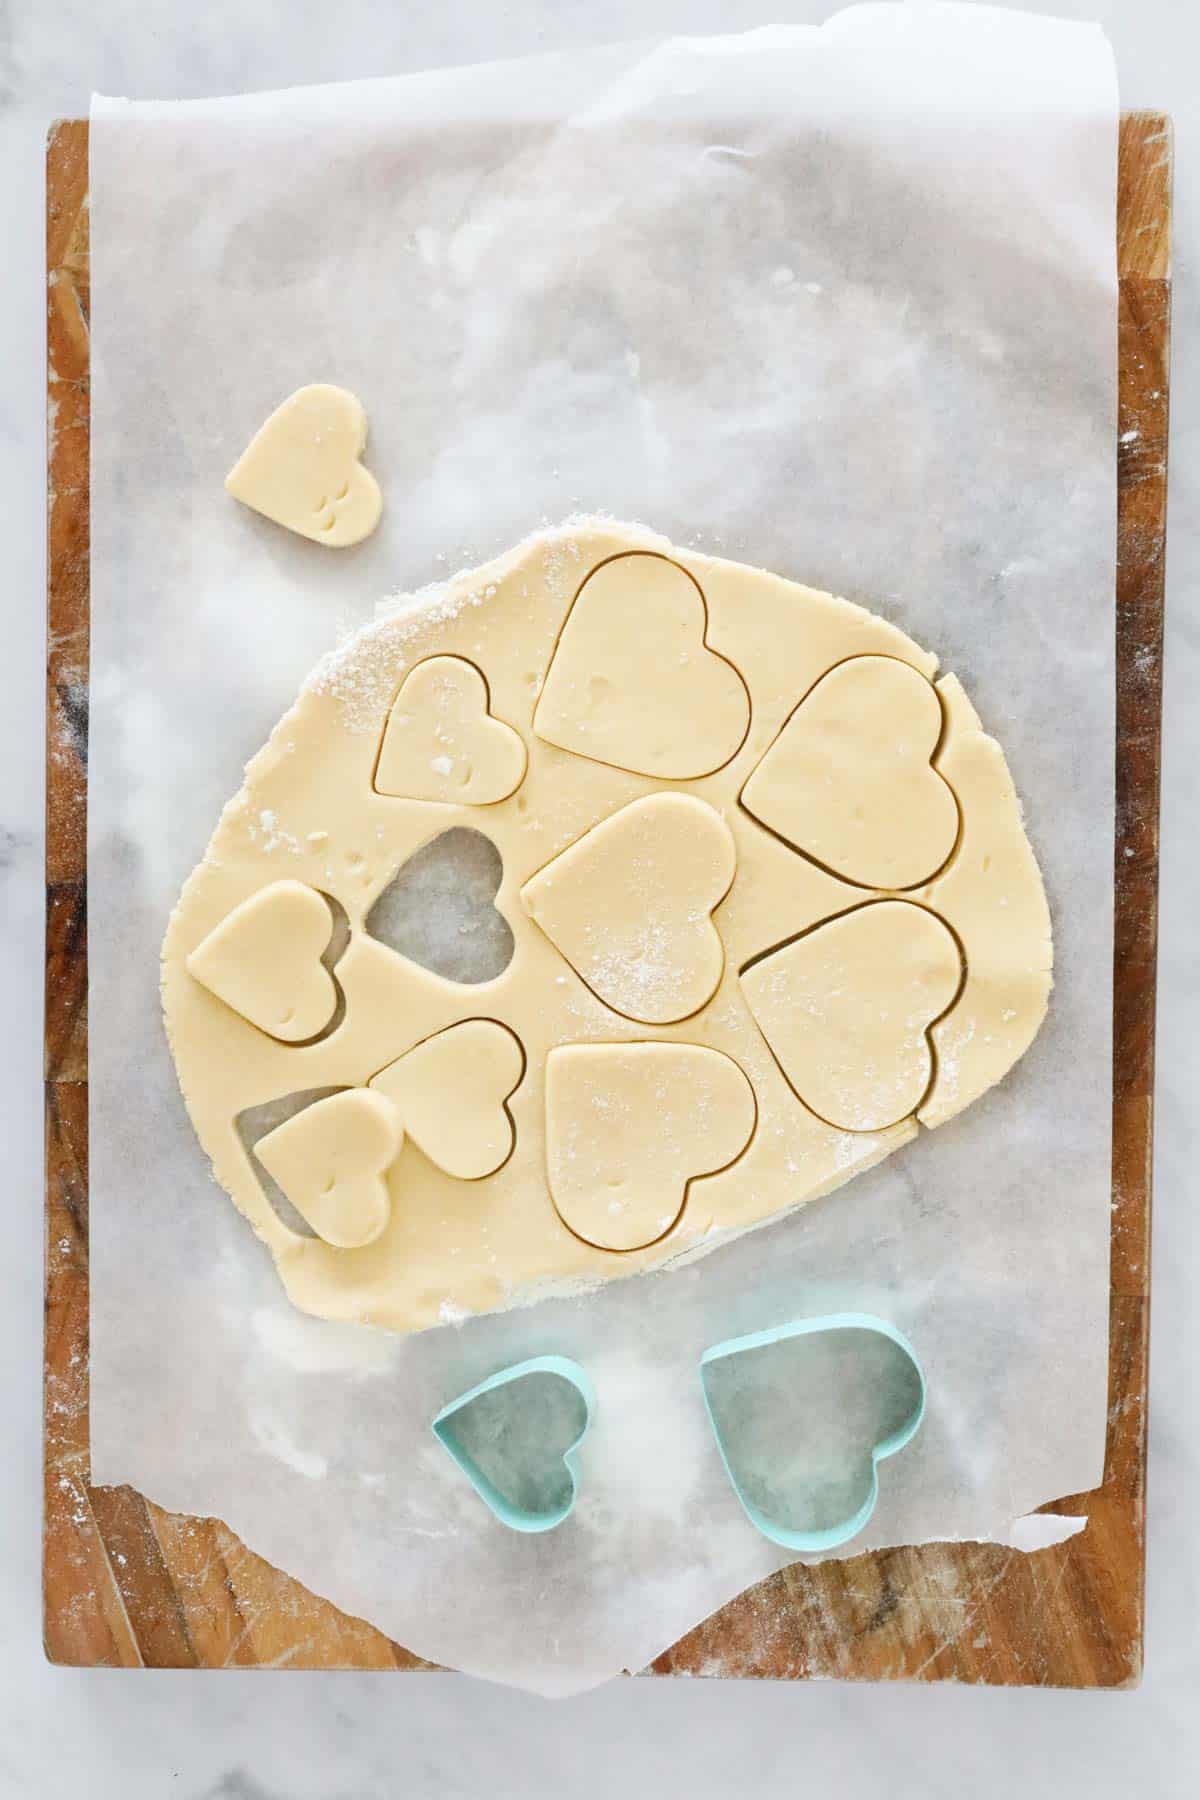 Rolled out dough with heart shapes cut out with cookie cutters.